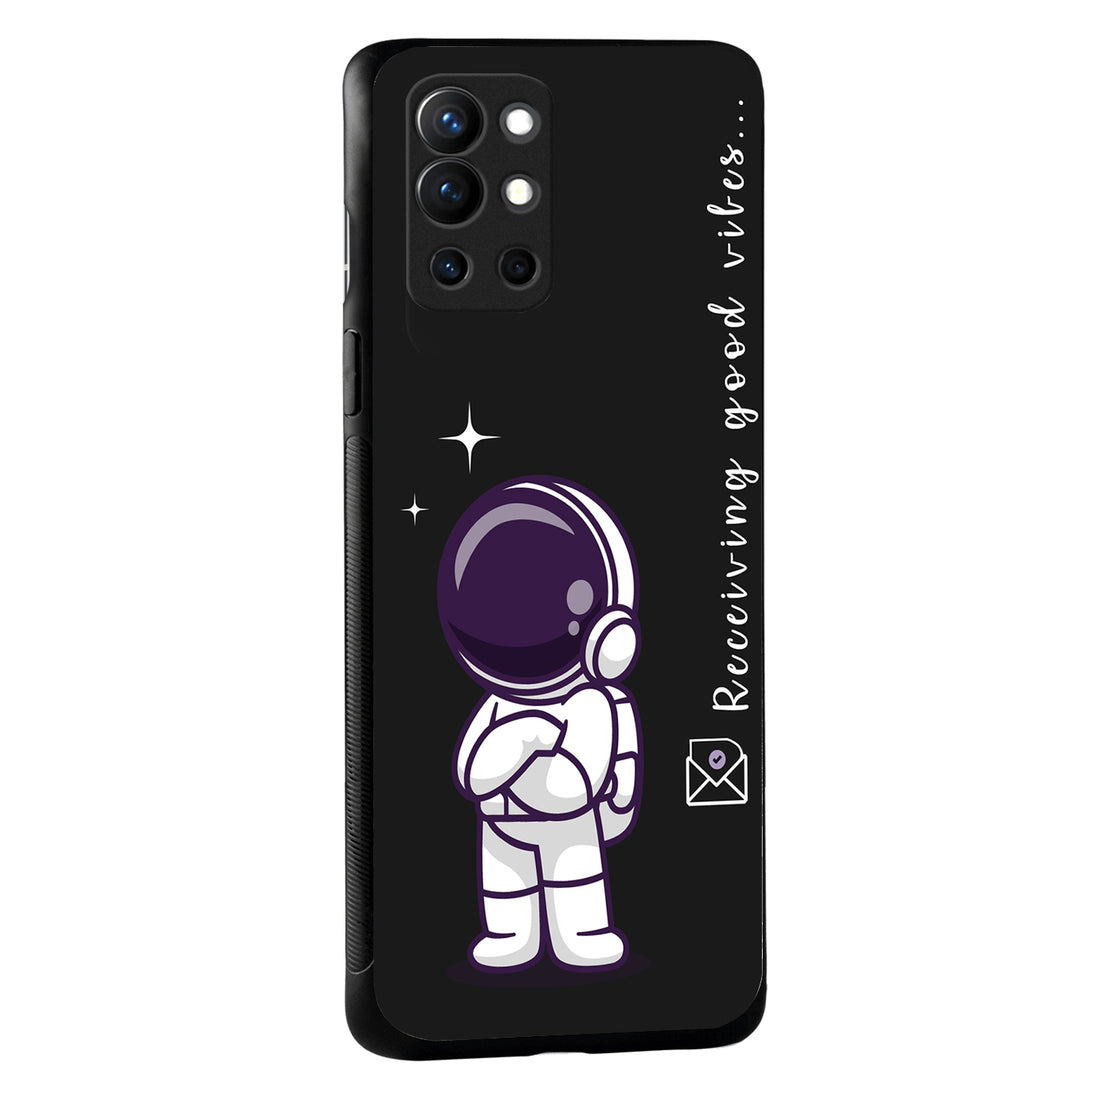 Receiving Good Vibes Bff Oneplus 9 R Back Case